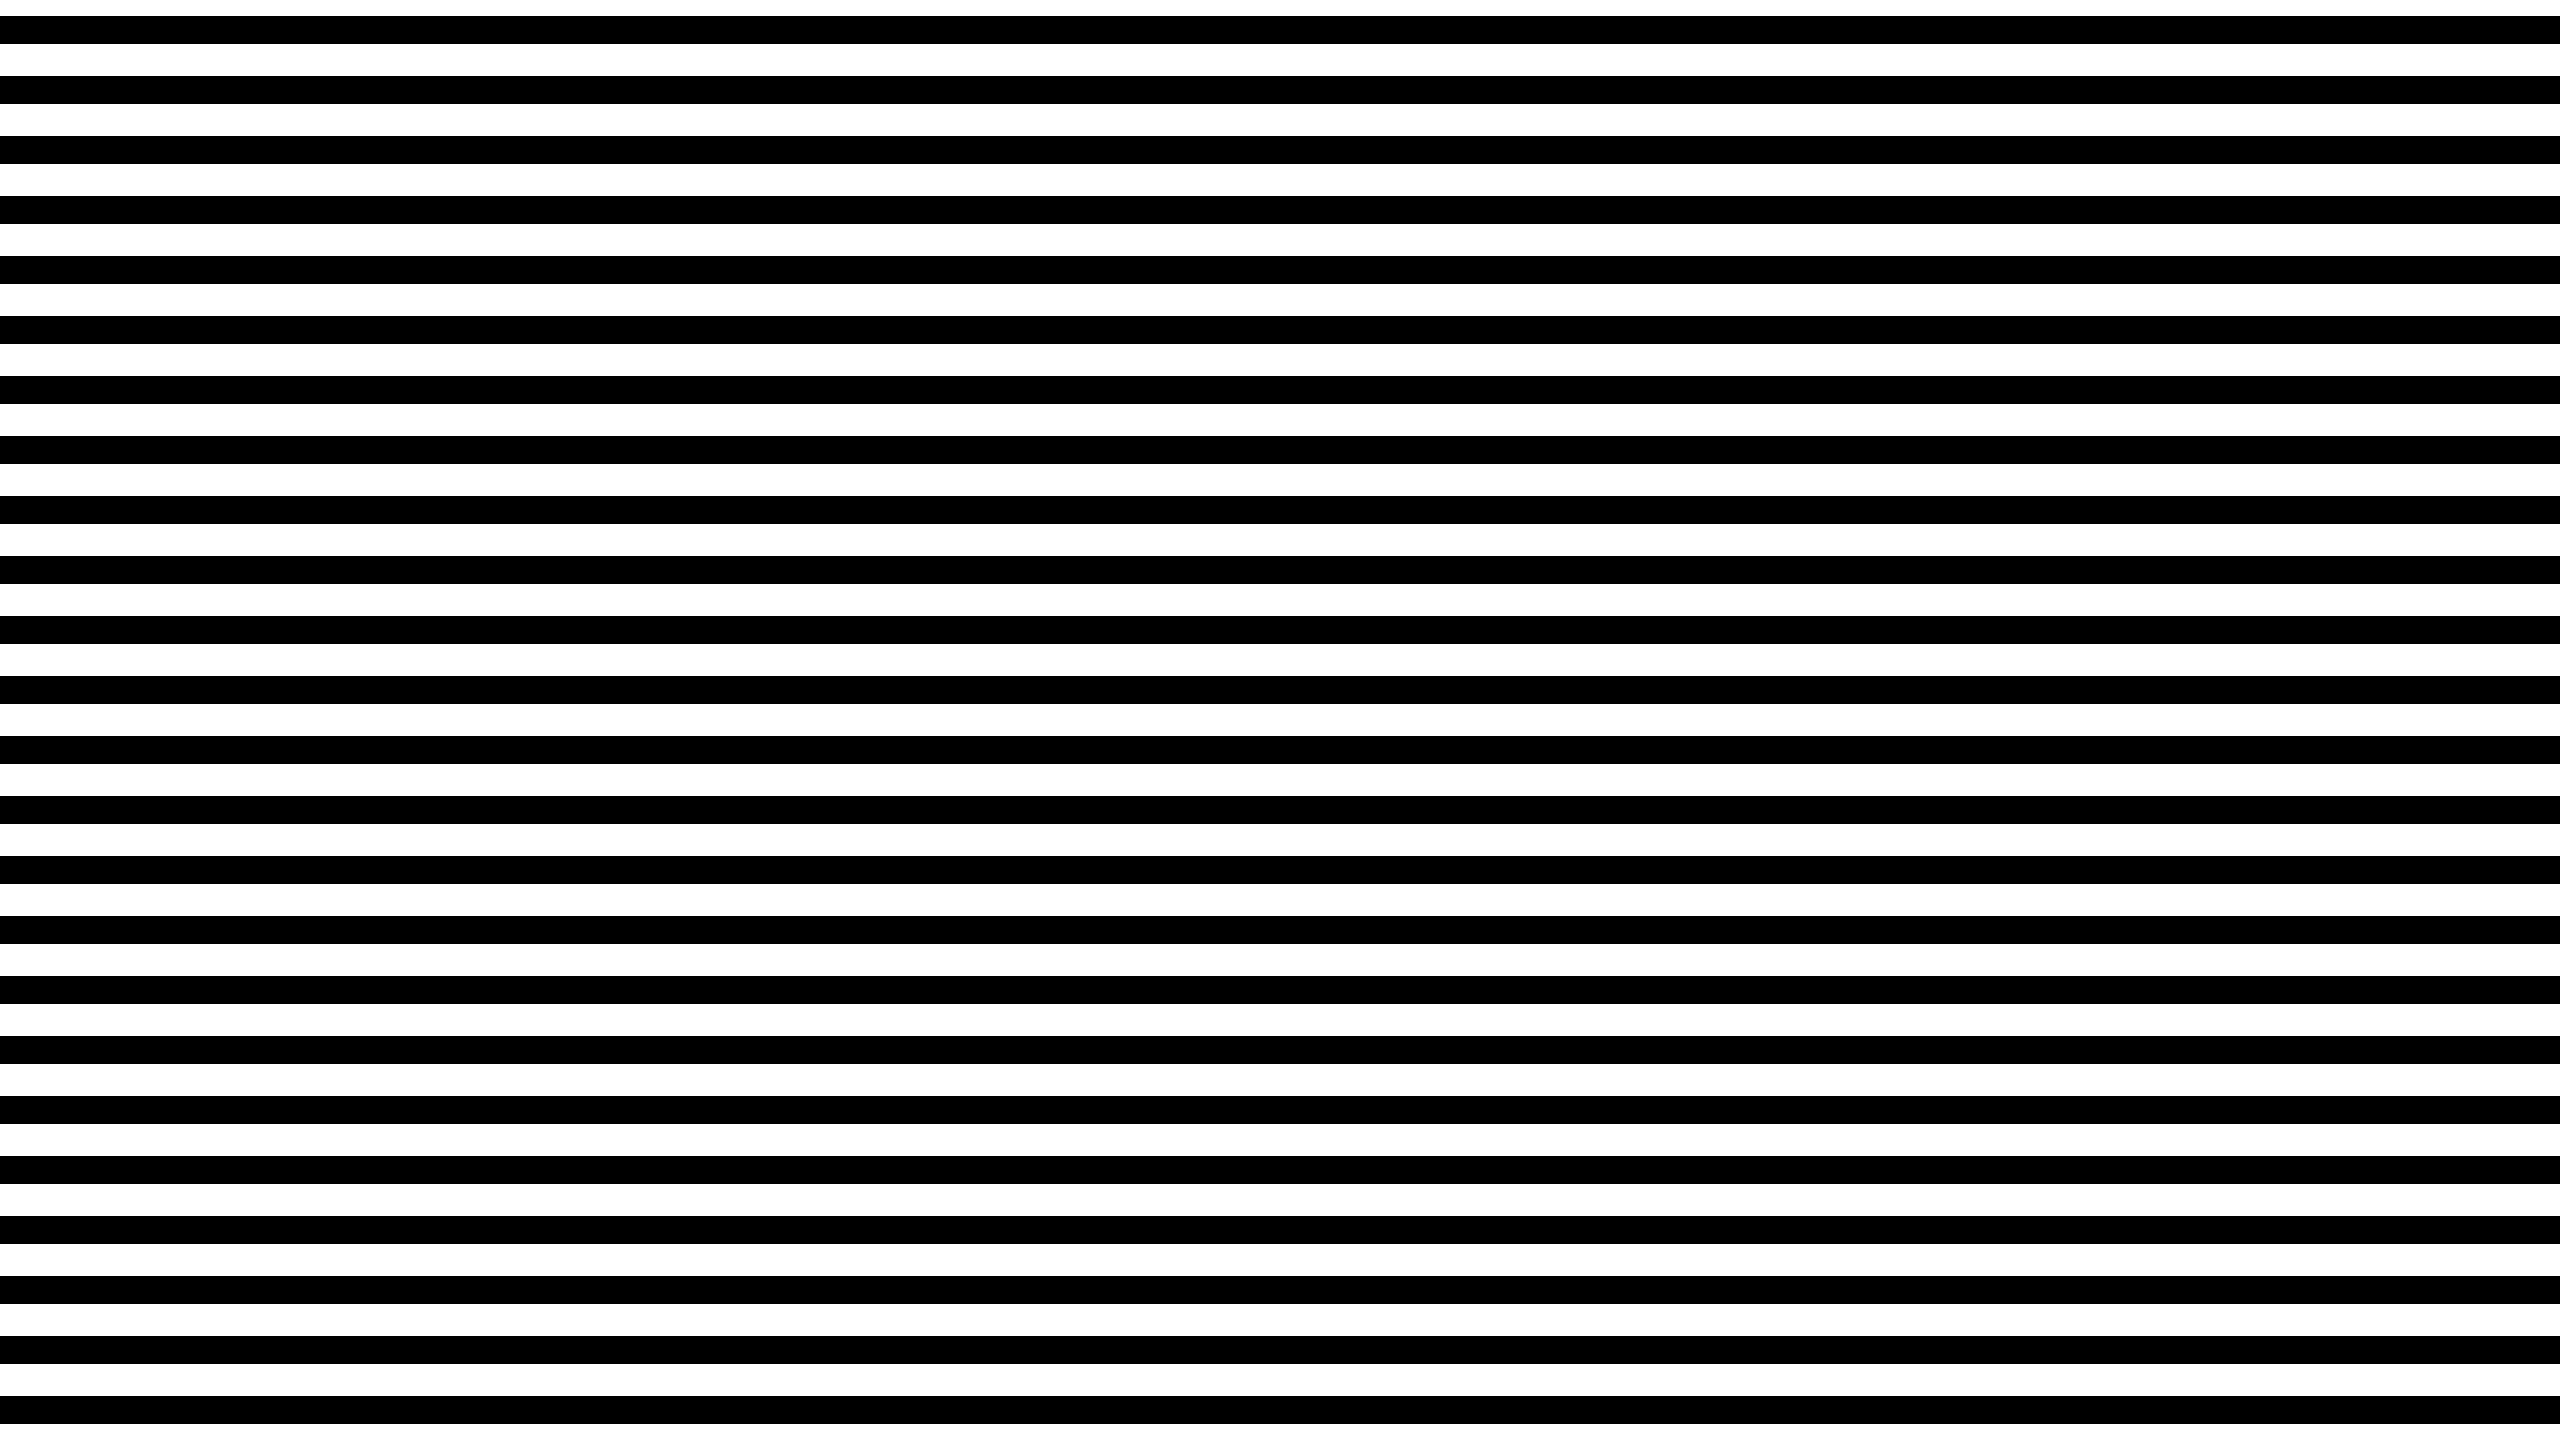 Black and White Stripes Wallpapers.